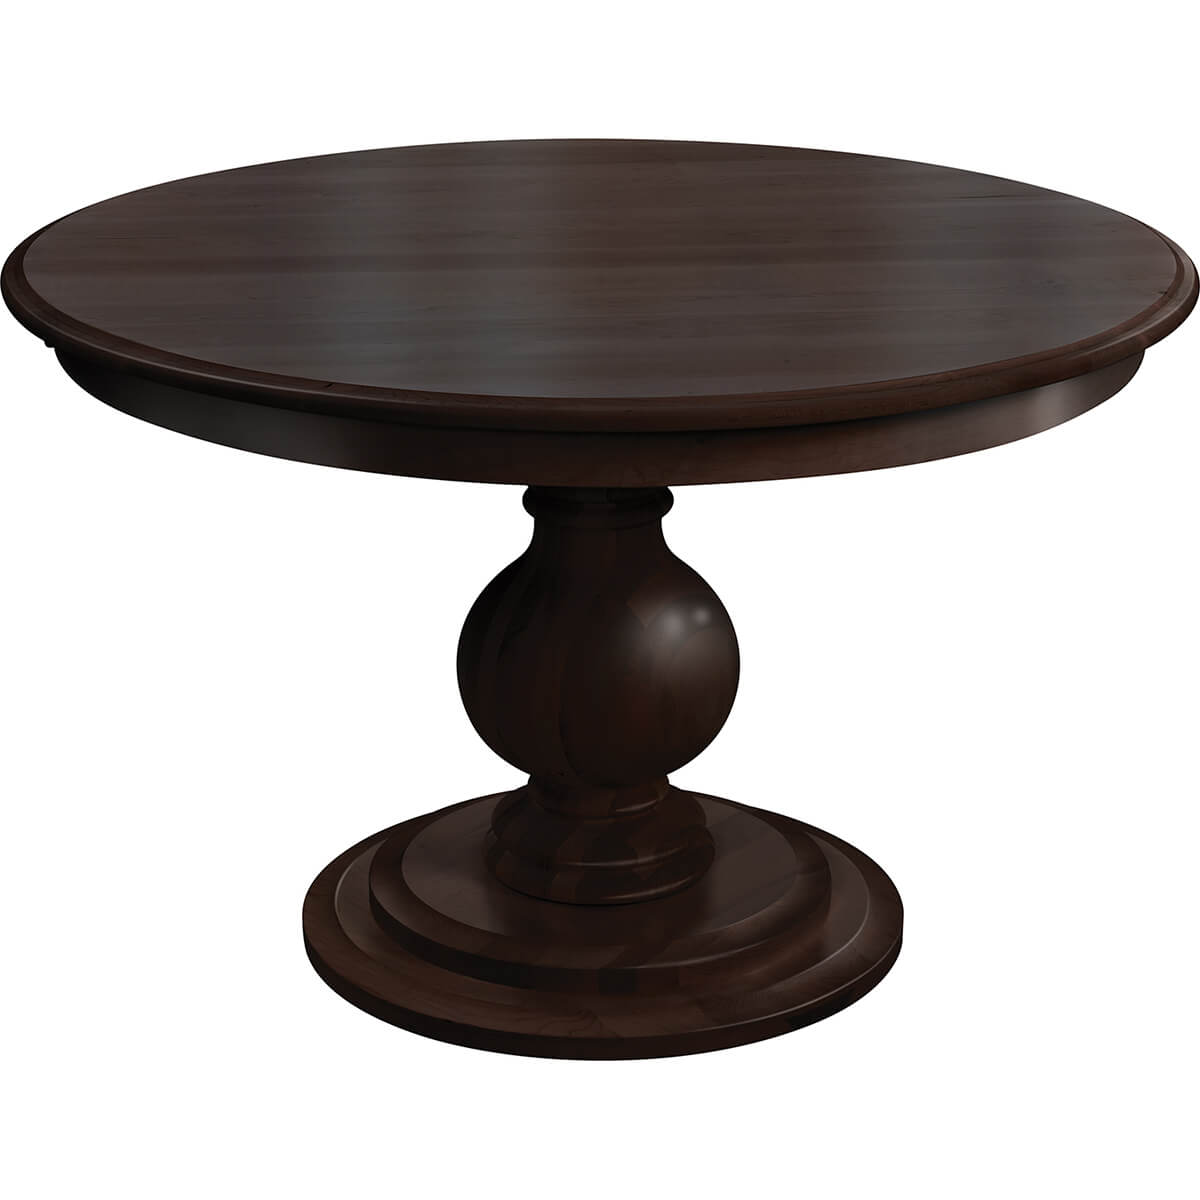 Read more about the article European Pedestal Table